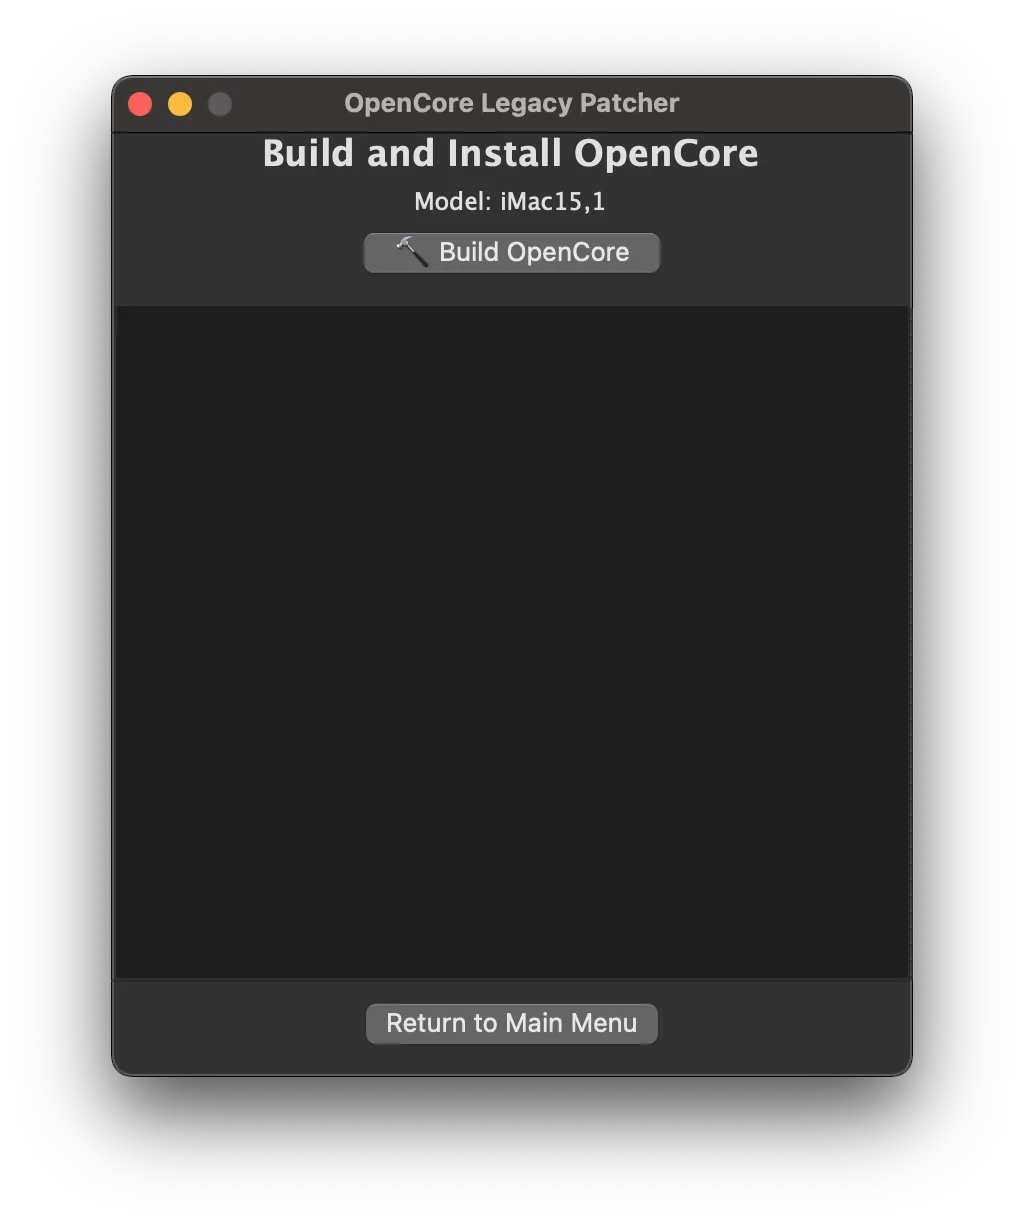 click Build OpenCore to start building